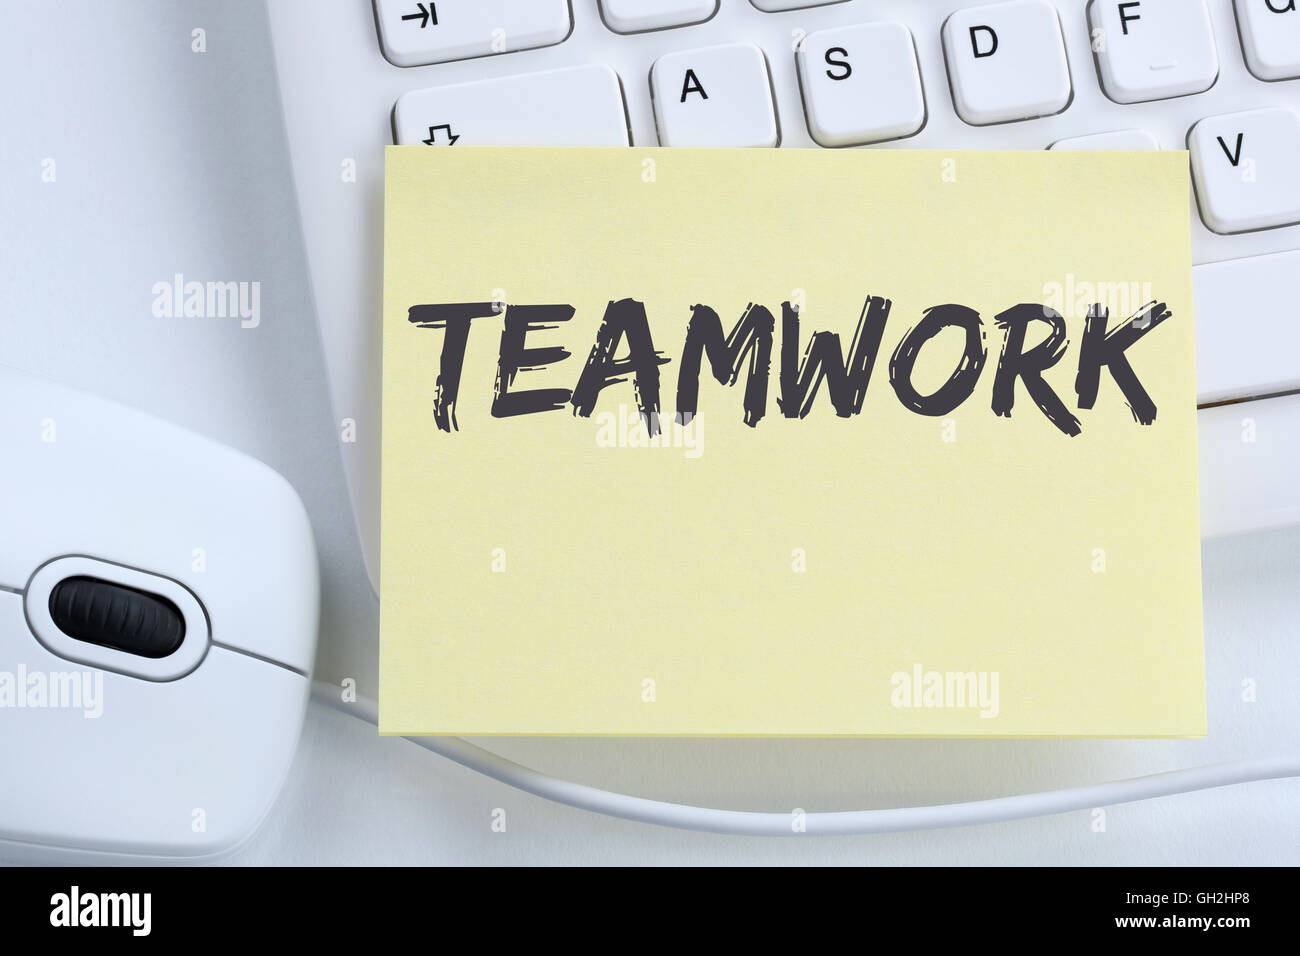 Teamwork team working together business concept success office computer keyboard Stock Photo